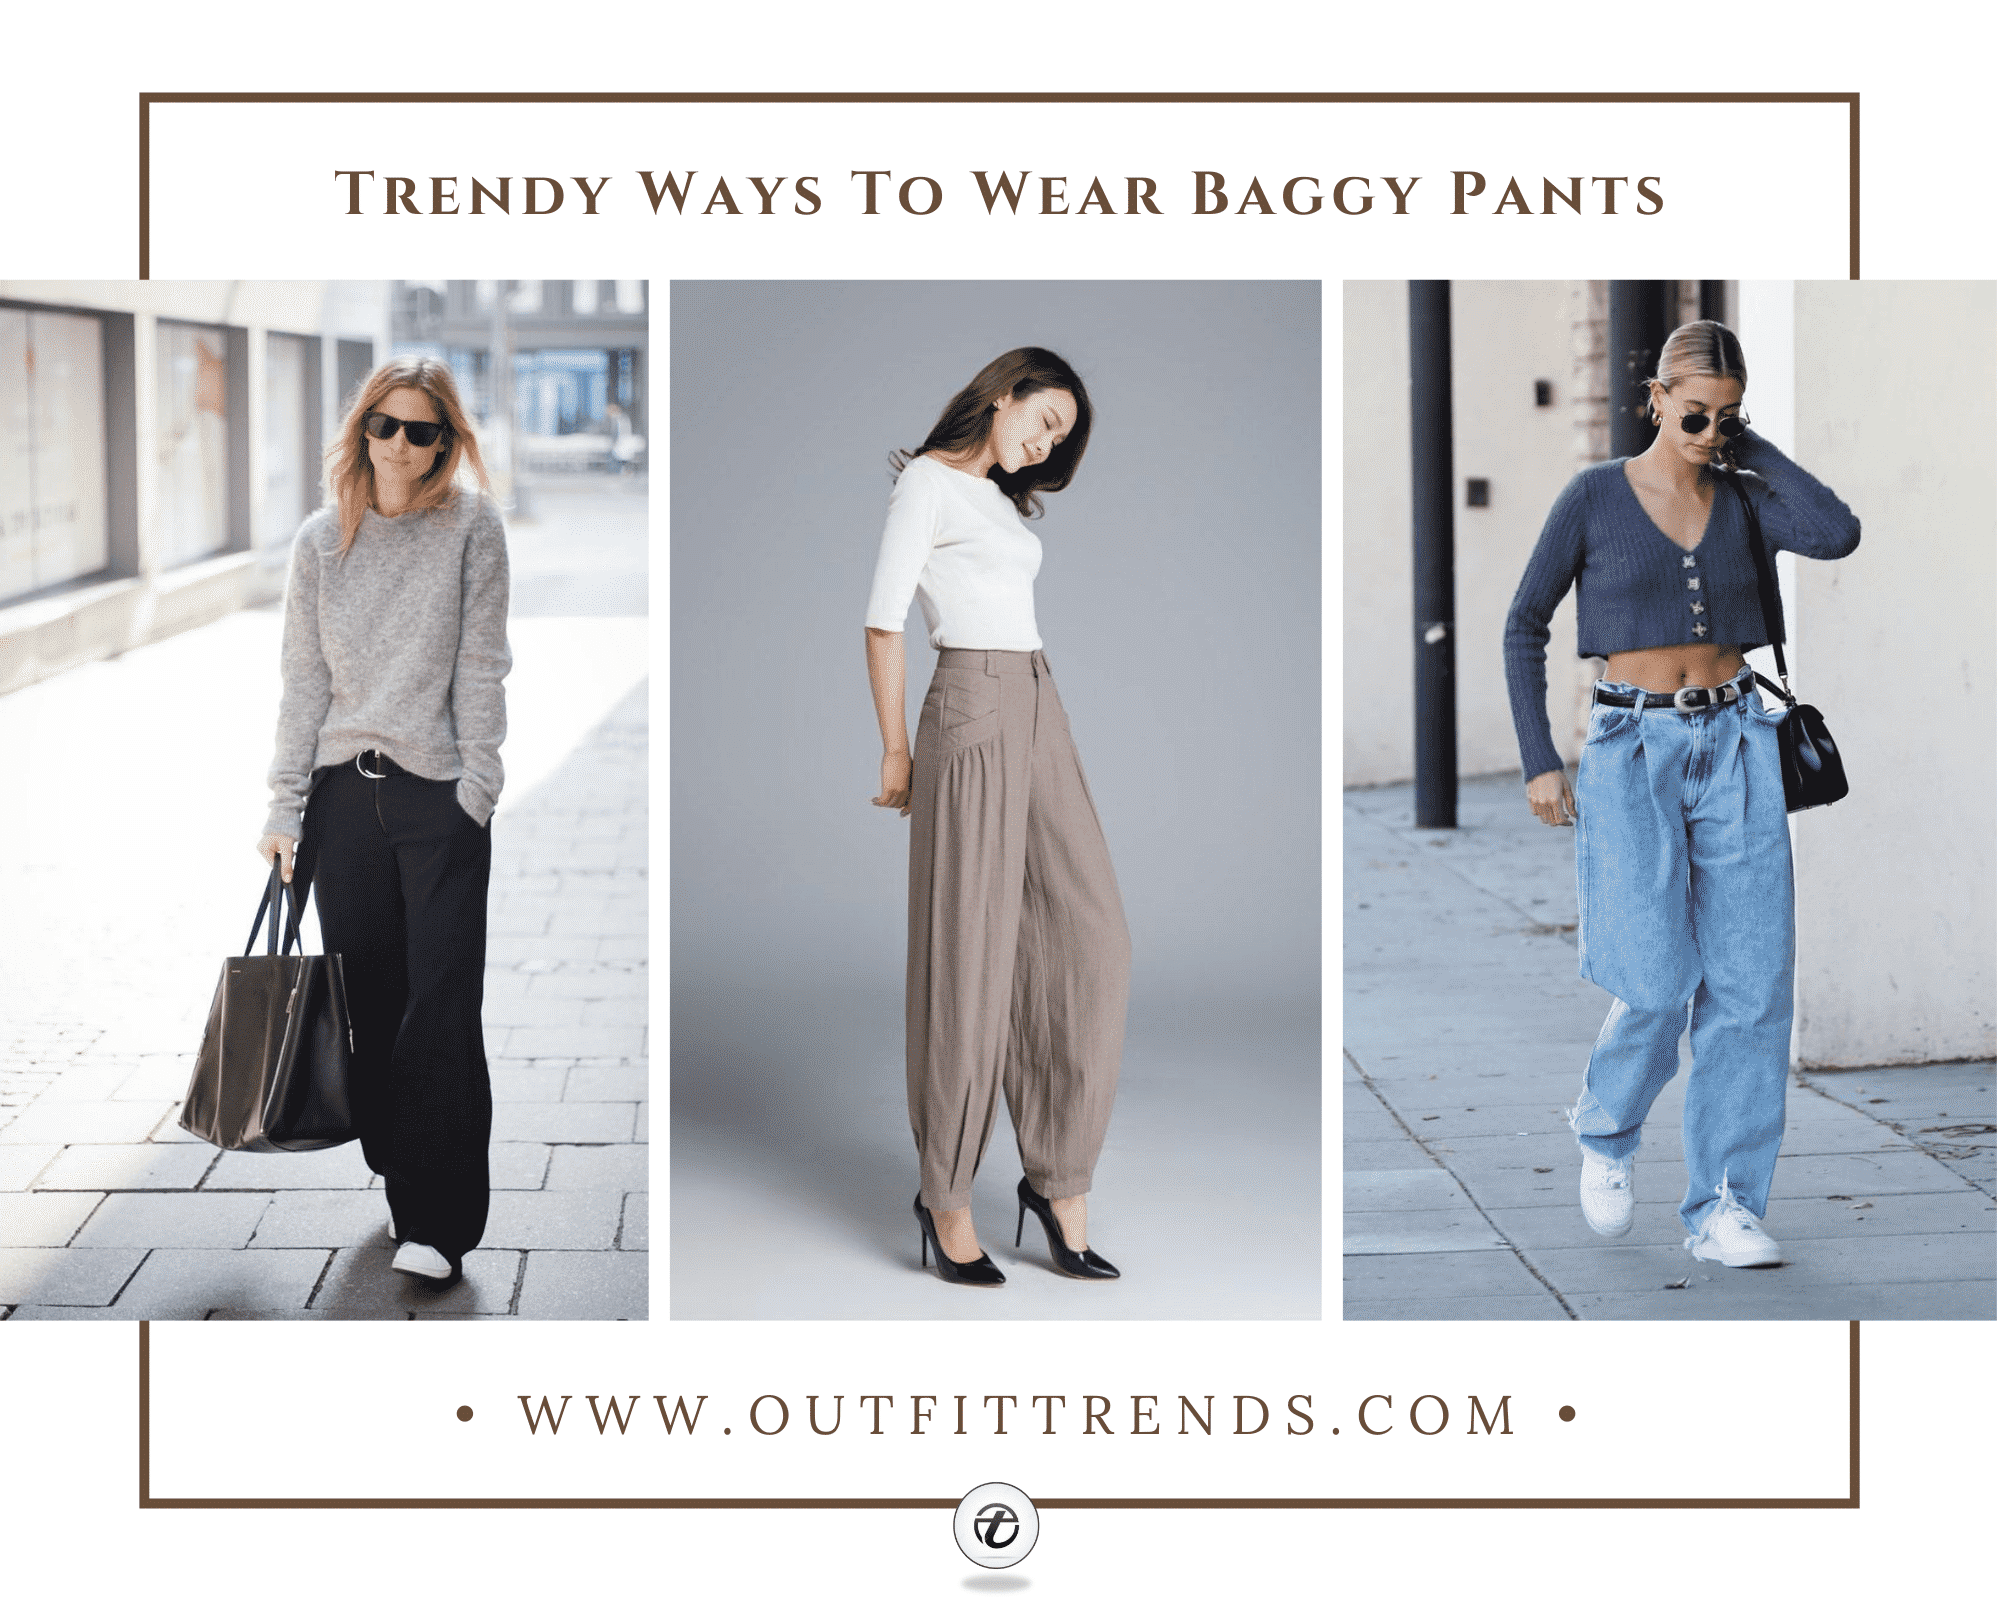 HOW TO WEAR BAGGY PANTS FOR WOMEN